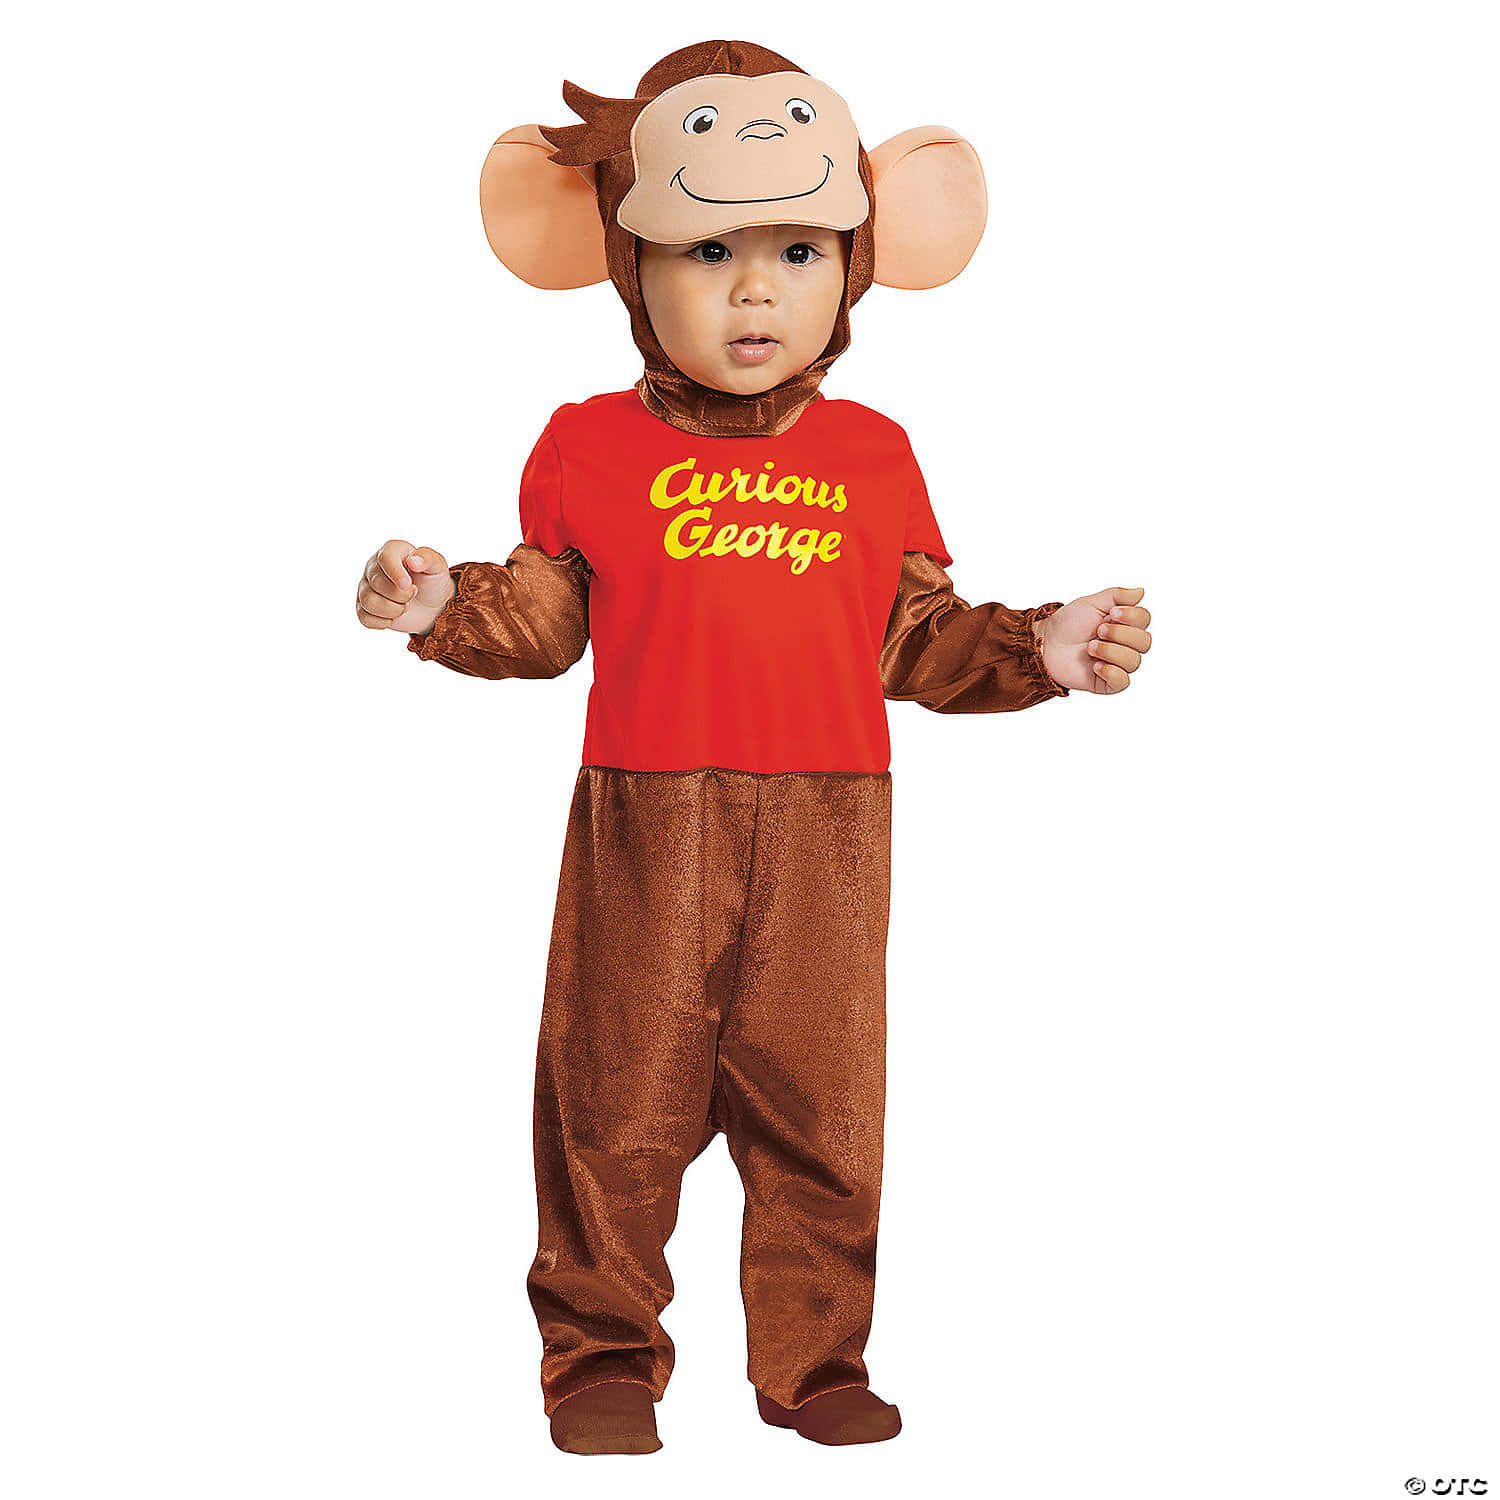 A Baby Dressed As A Monkey